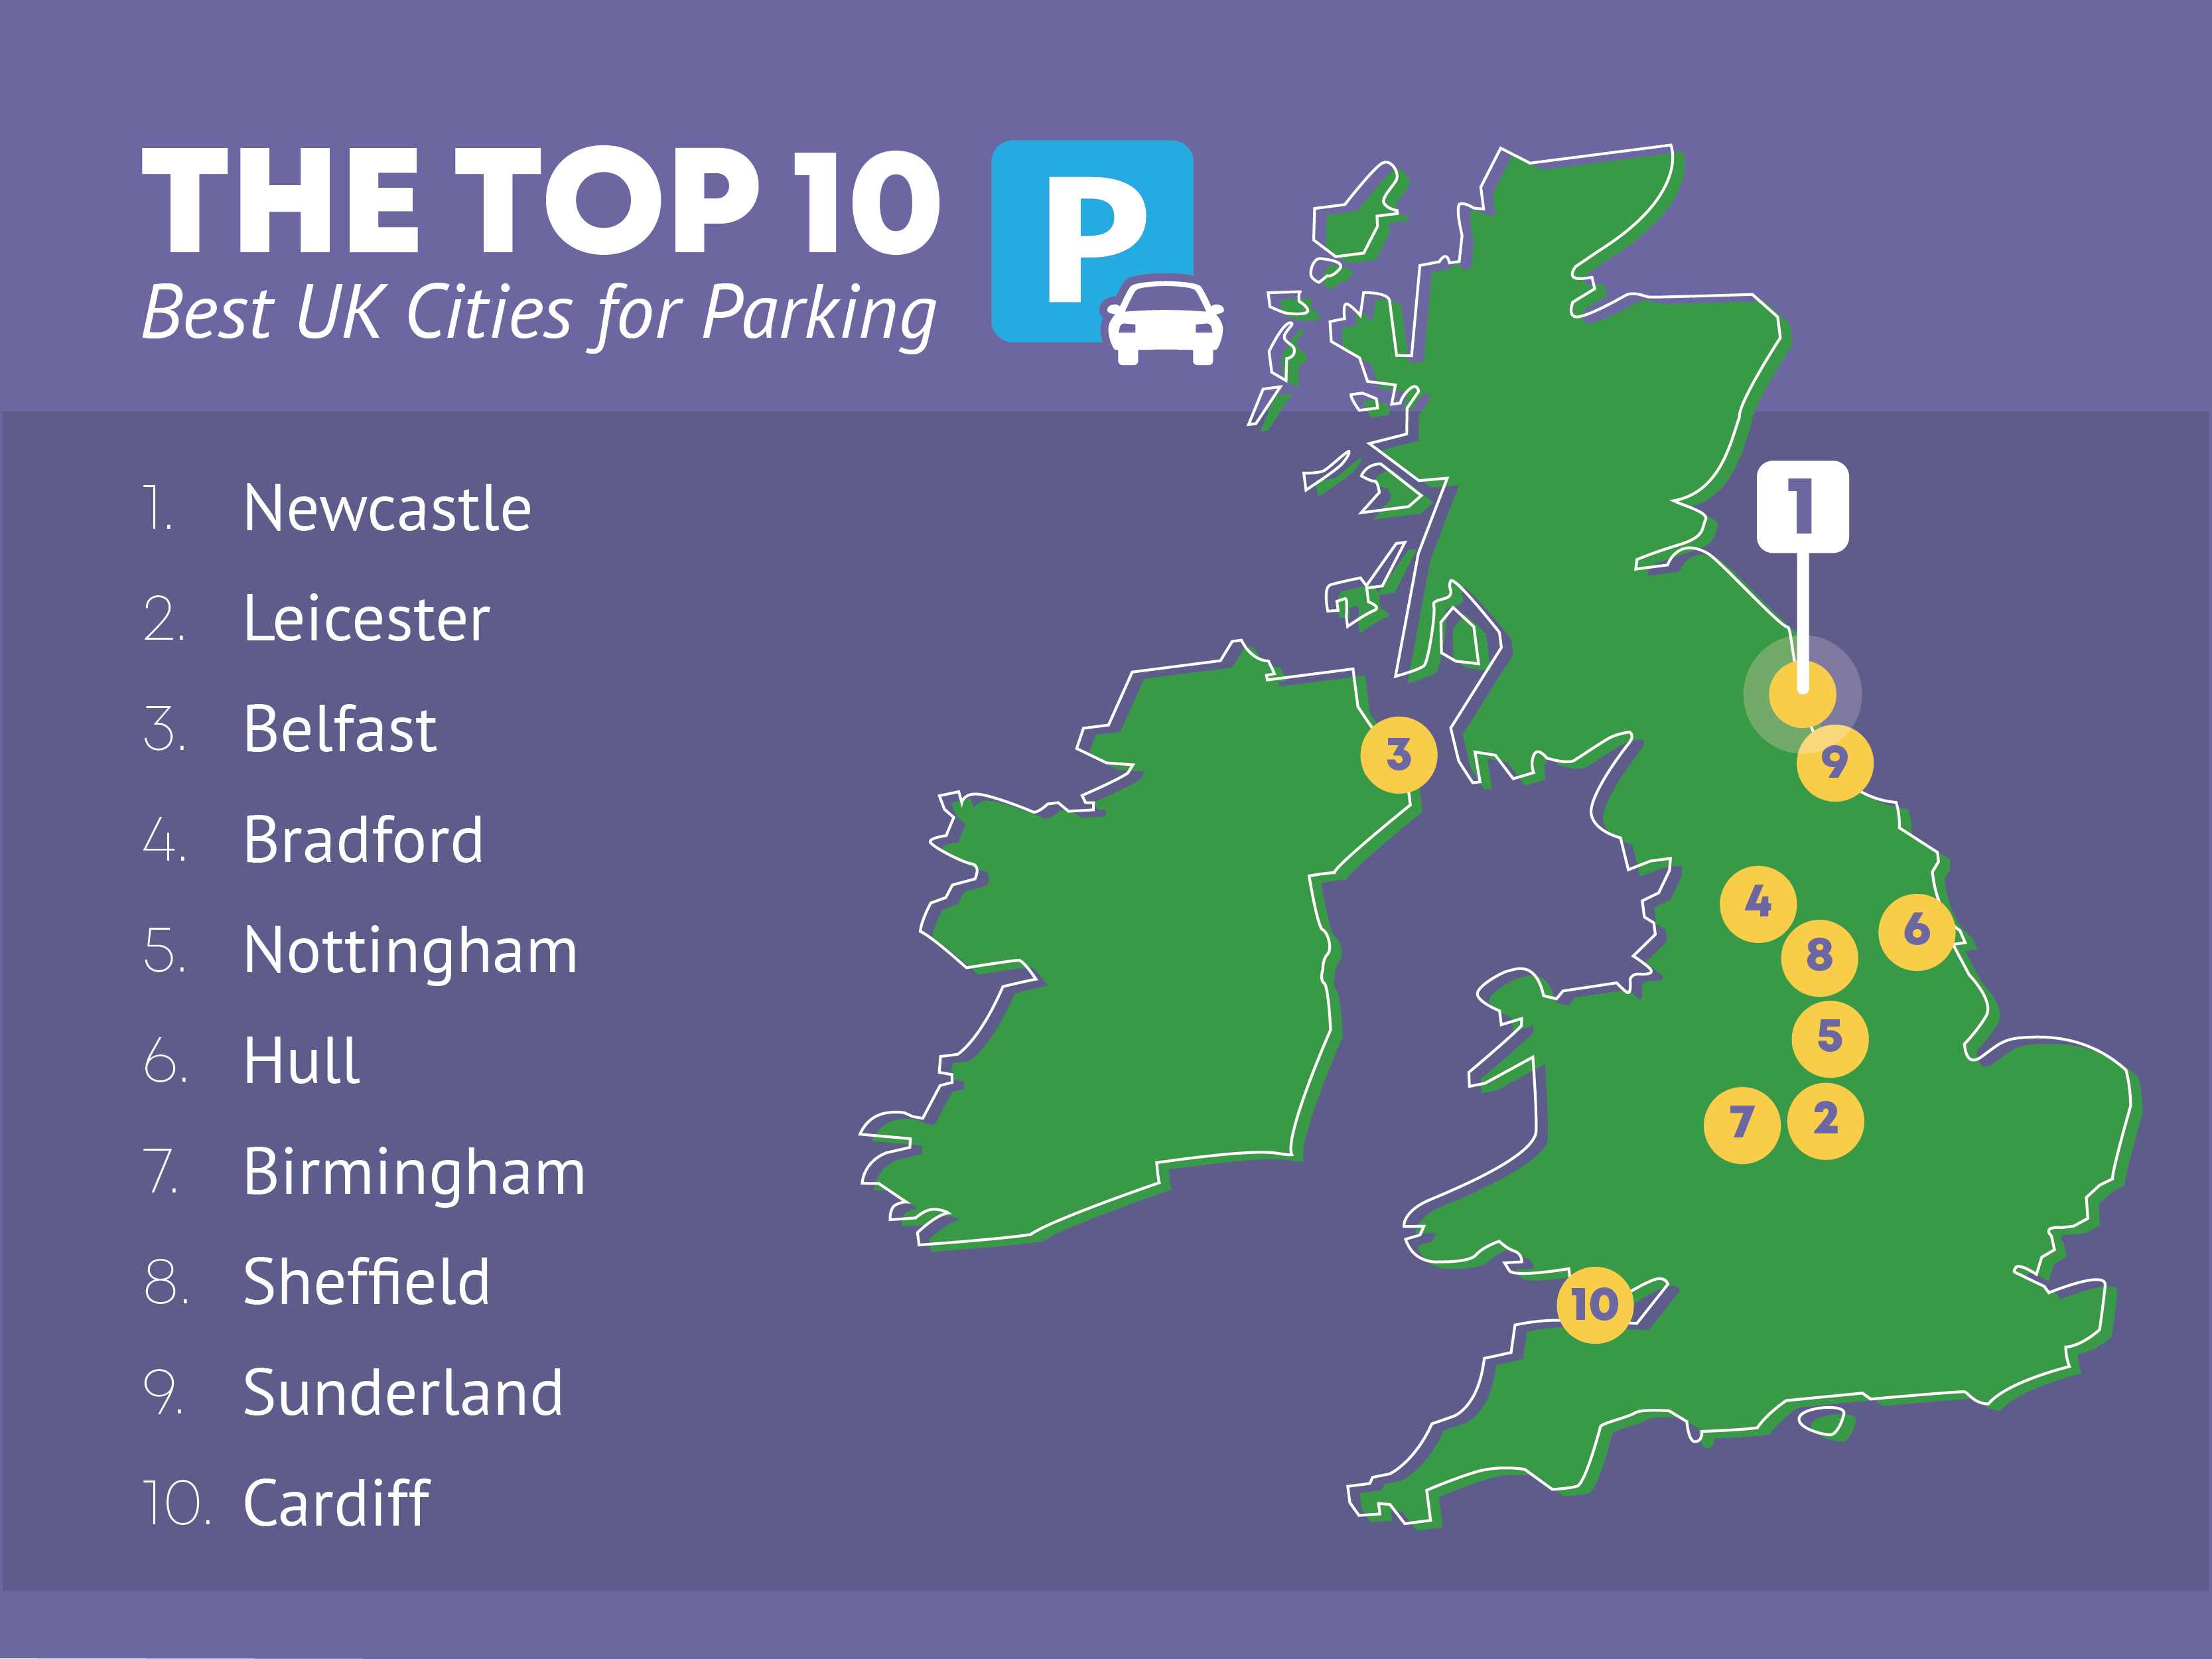 Study conducted by InsuretheGap.com assessed the number of parking spaces, average walking distance and average price.